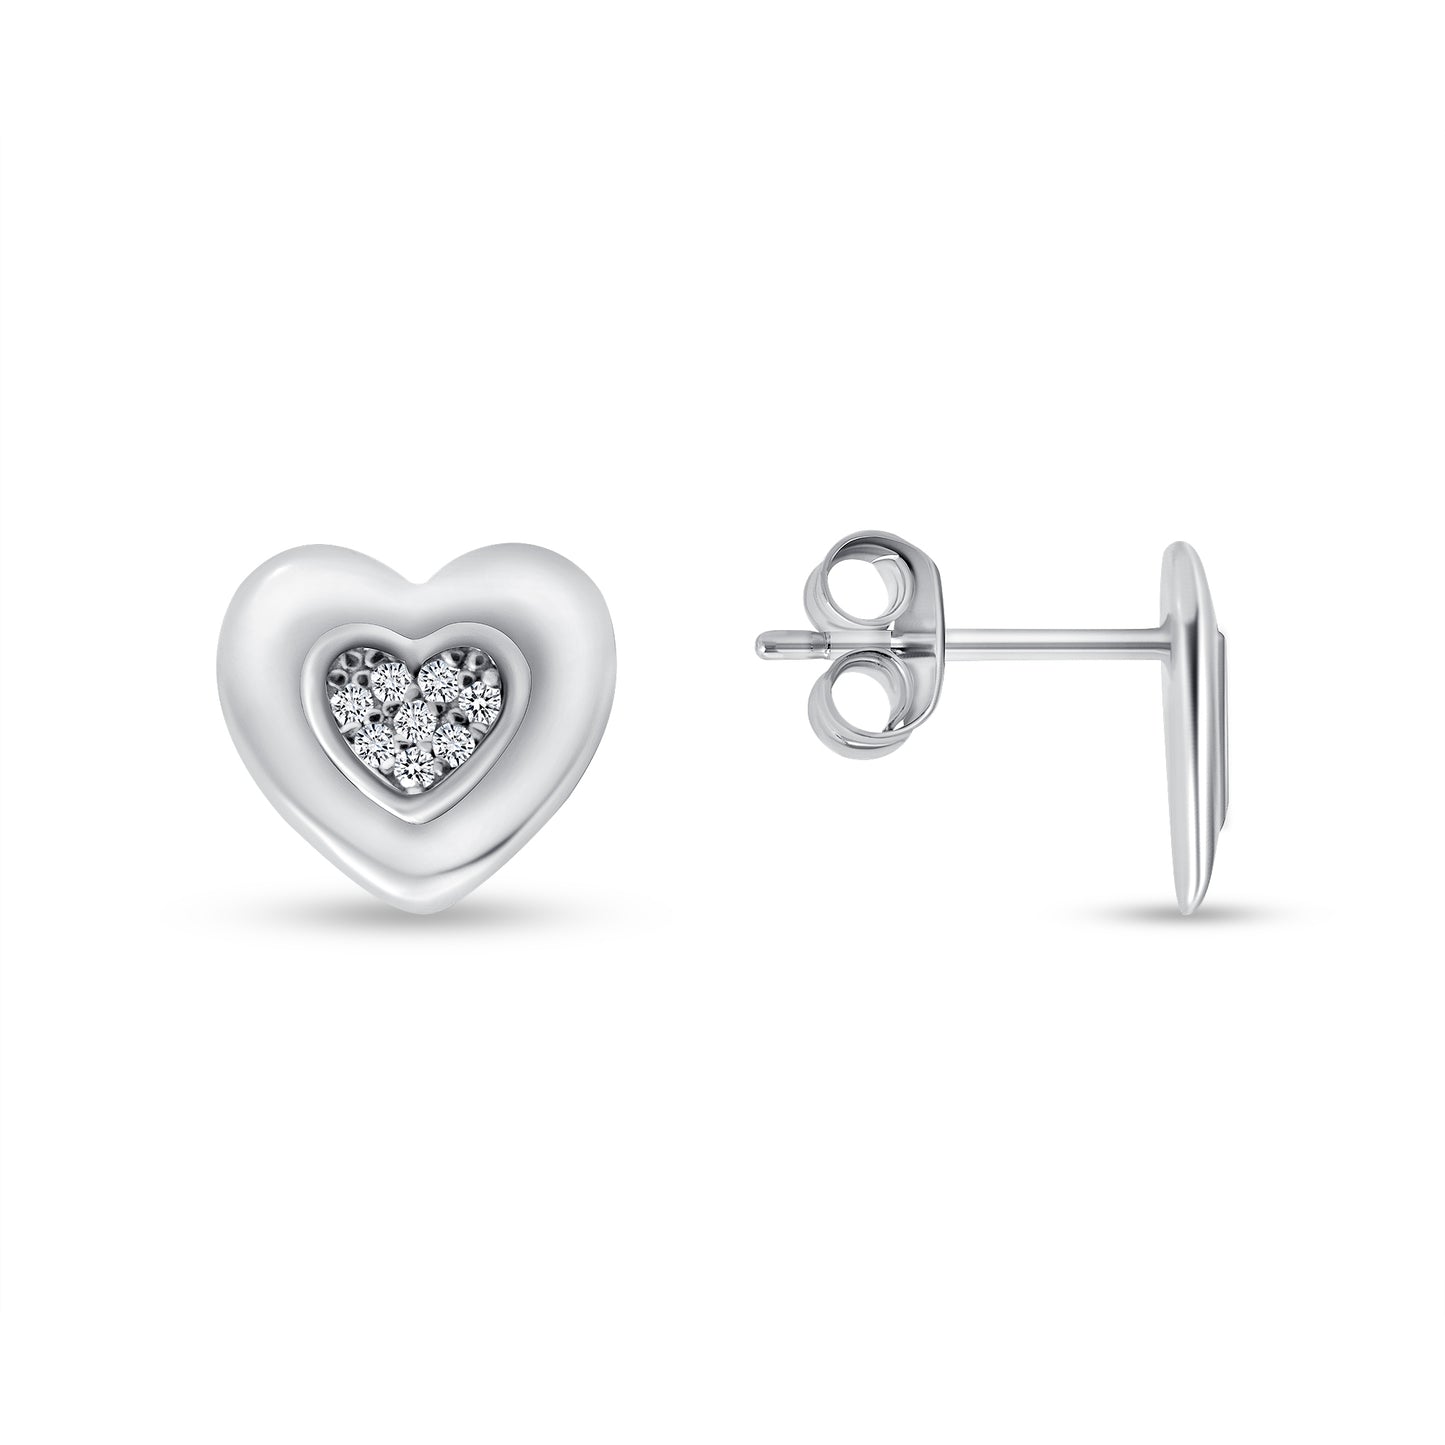 Silver 925 Rhodium Plated Mid Heart Cubic Zirconia Earring Stud. E5672